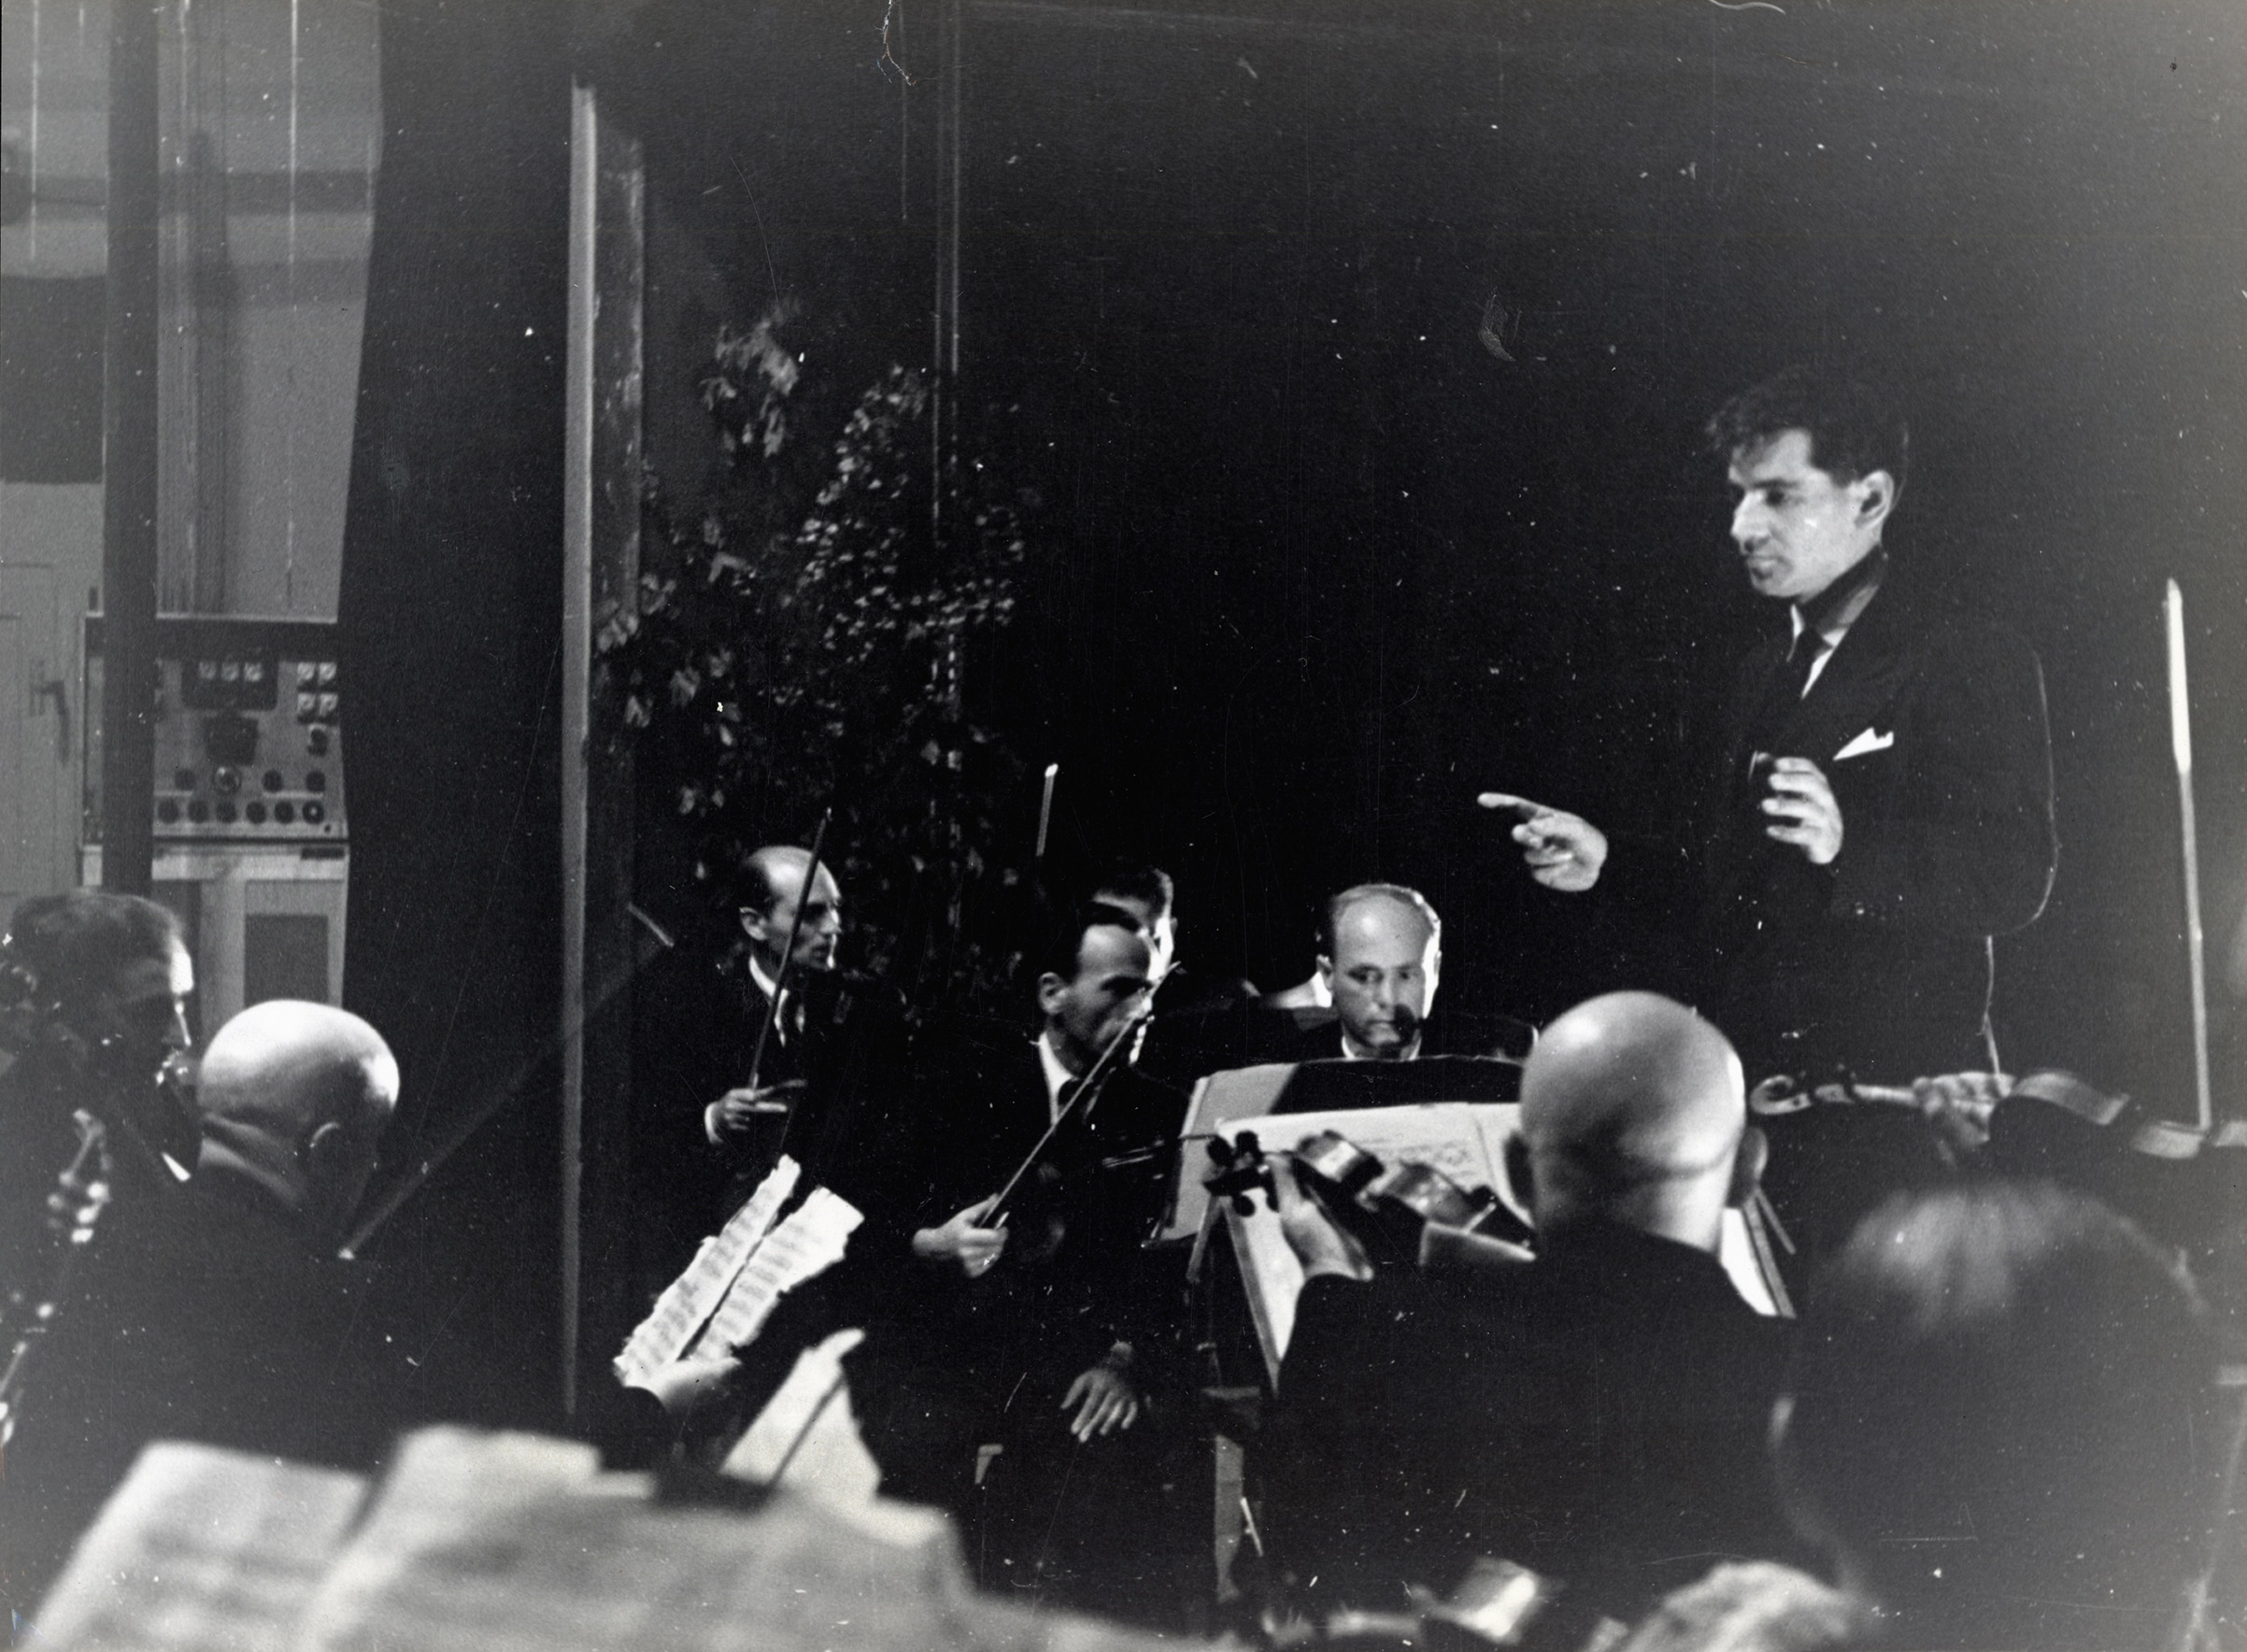 Leonard Bernstein conducting an orchestra of concentration camp survivors for a concert sponsored by the American Jewish Joint Distribution Committee on May 10, 1948, in Munich. (American Jewish Joint Distribution Committee)